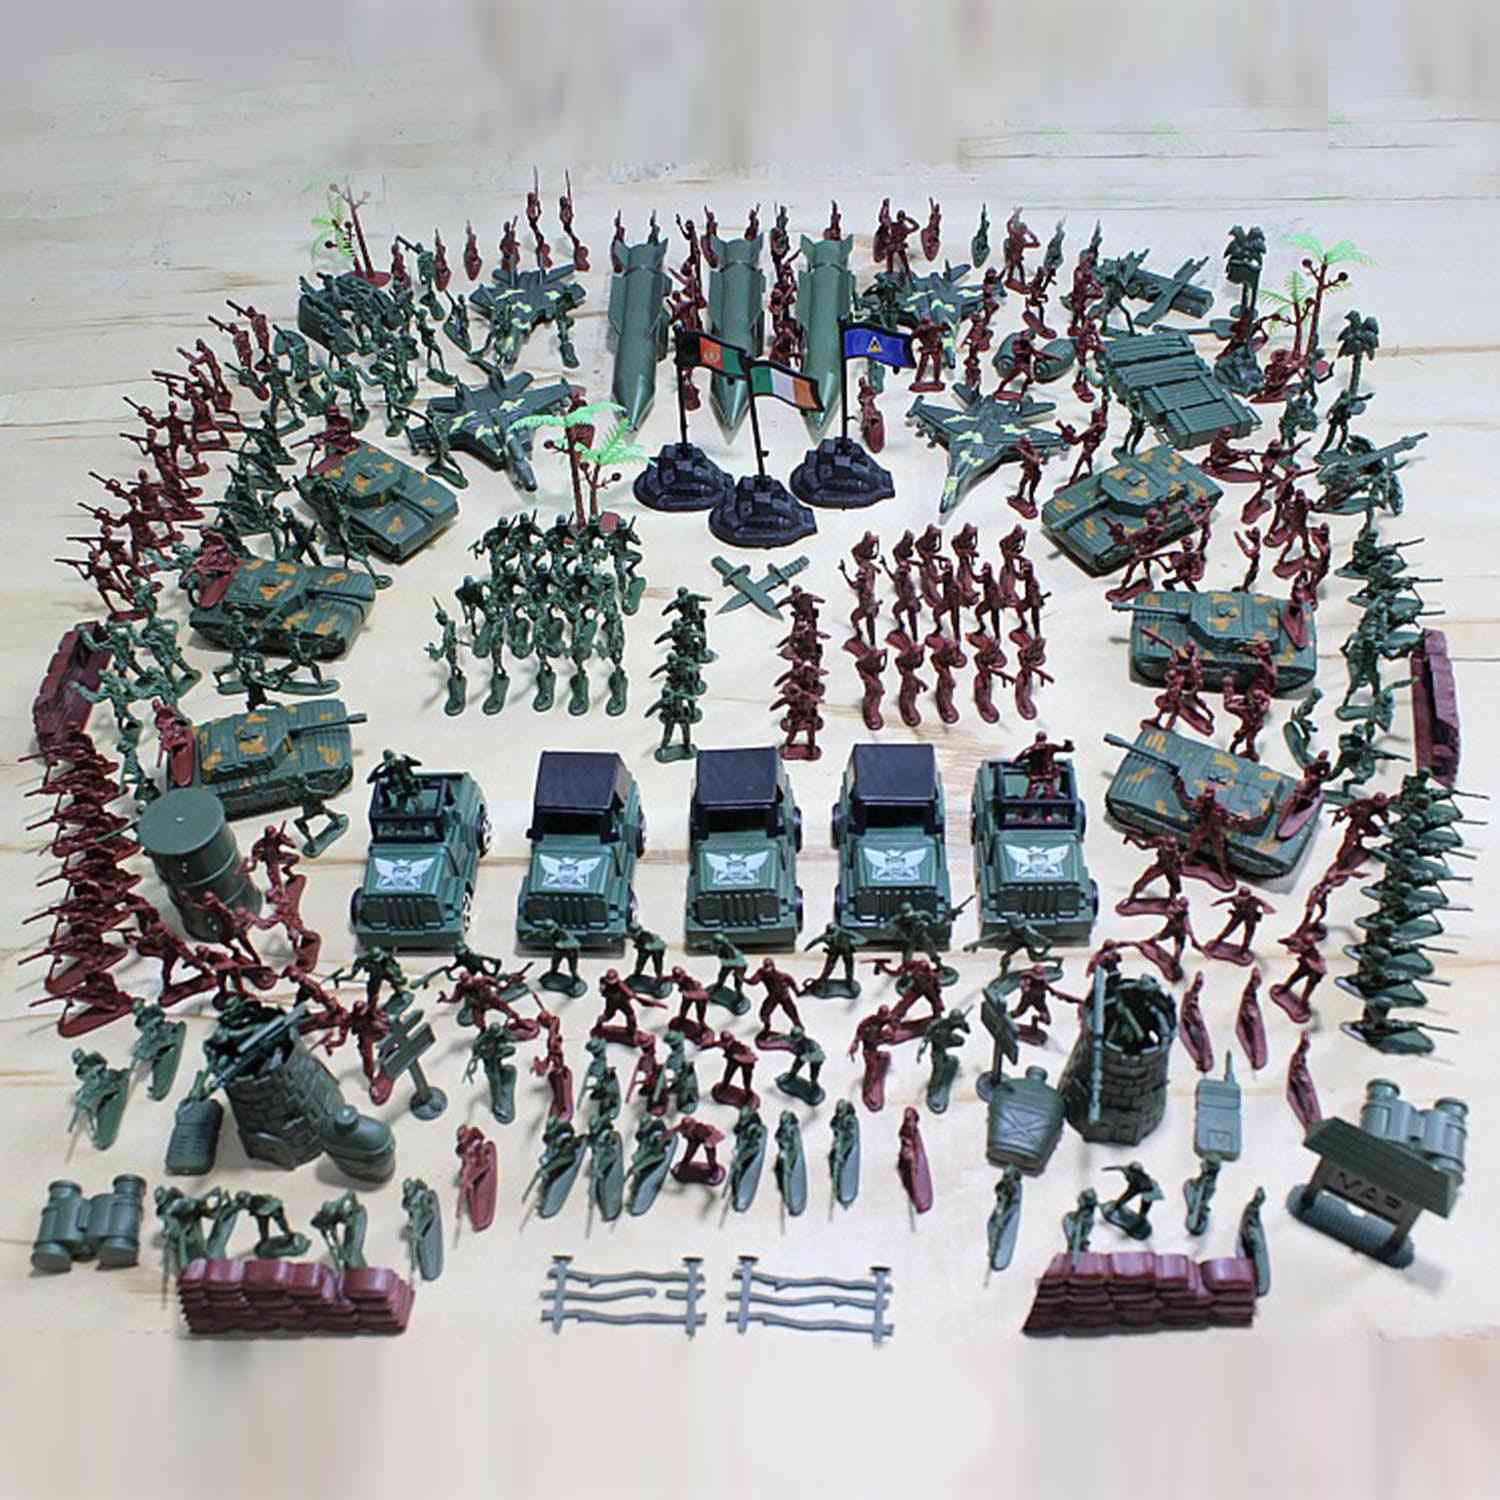 Military Battle Group Bucket, Soldiers And Accessories Toy Play Set